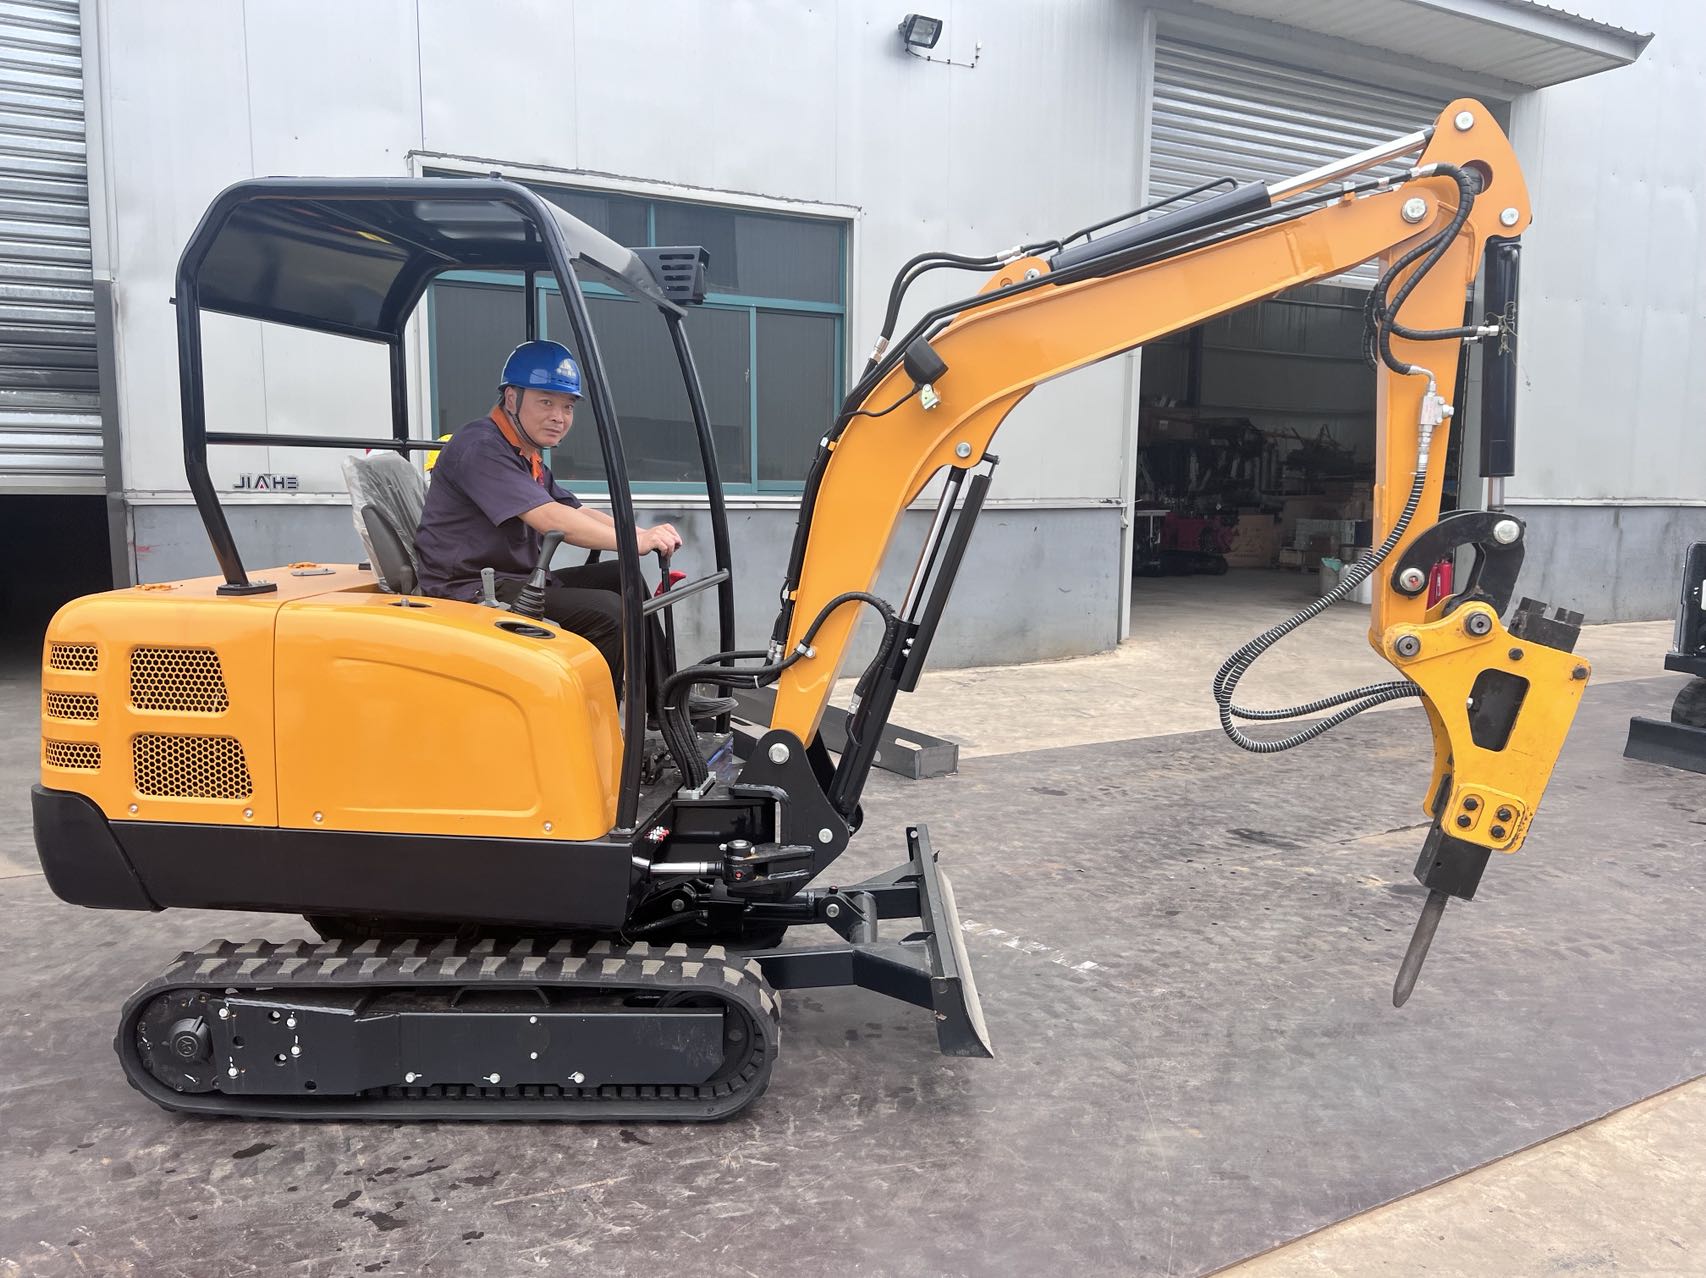 Hammer Time! How to Match and Use a Breaker Attachment with a Mini Excavator